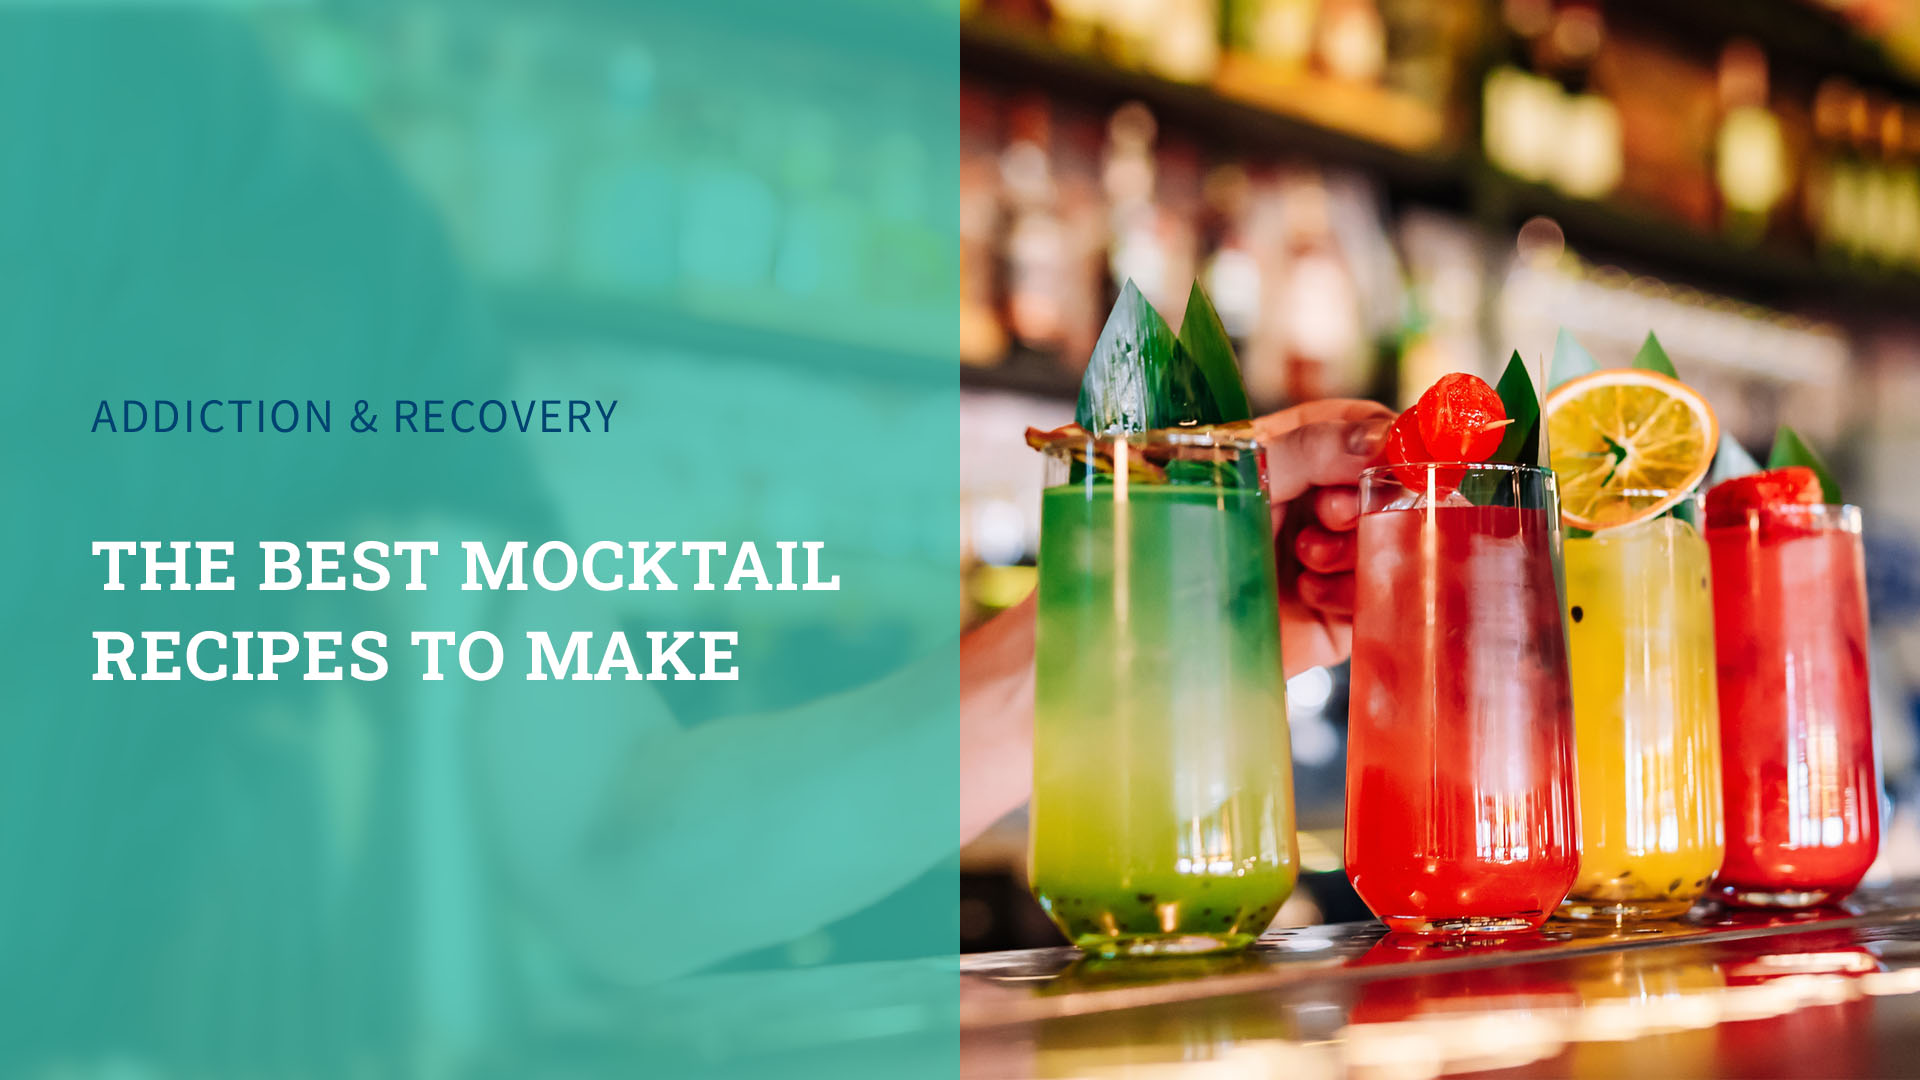 The Best Mocktail Recipes to Make